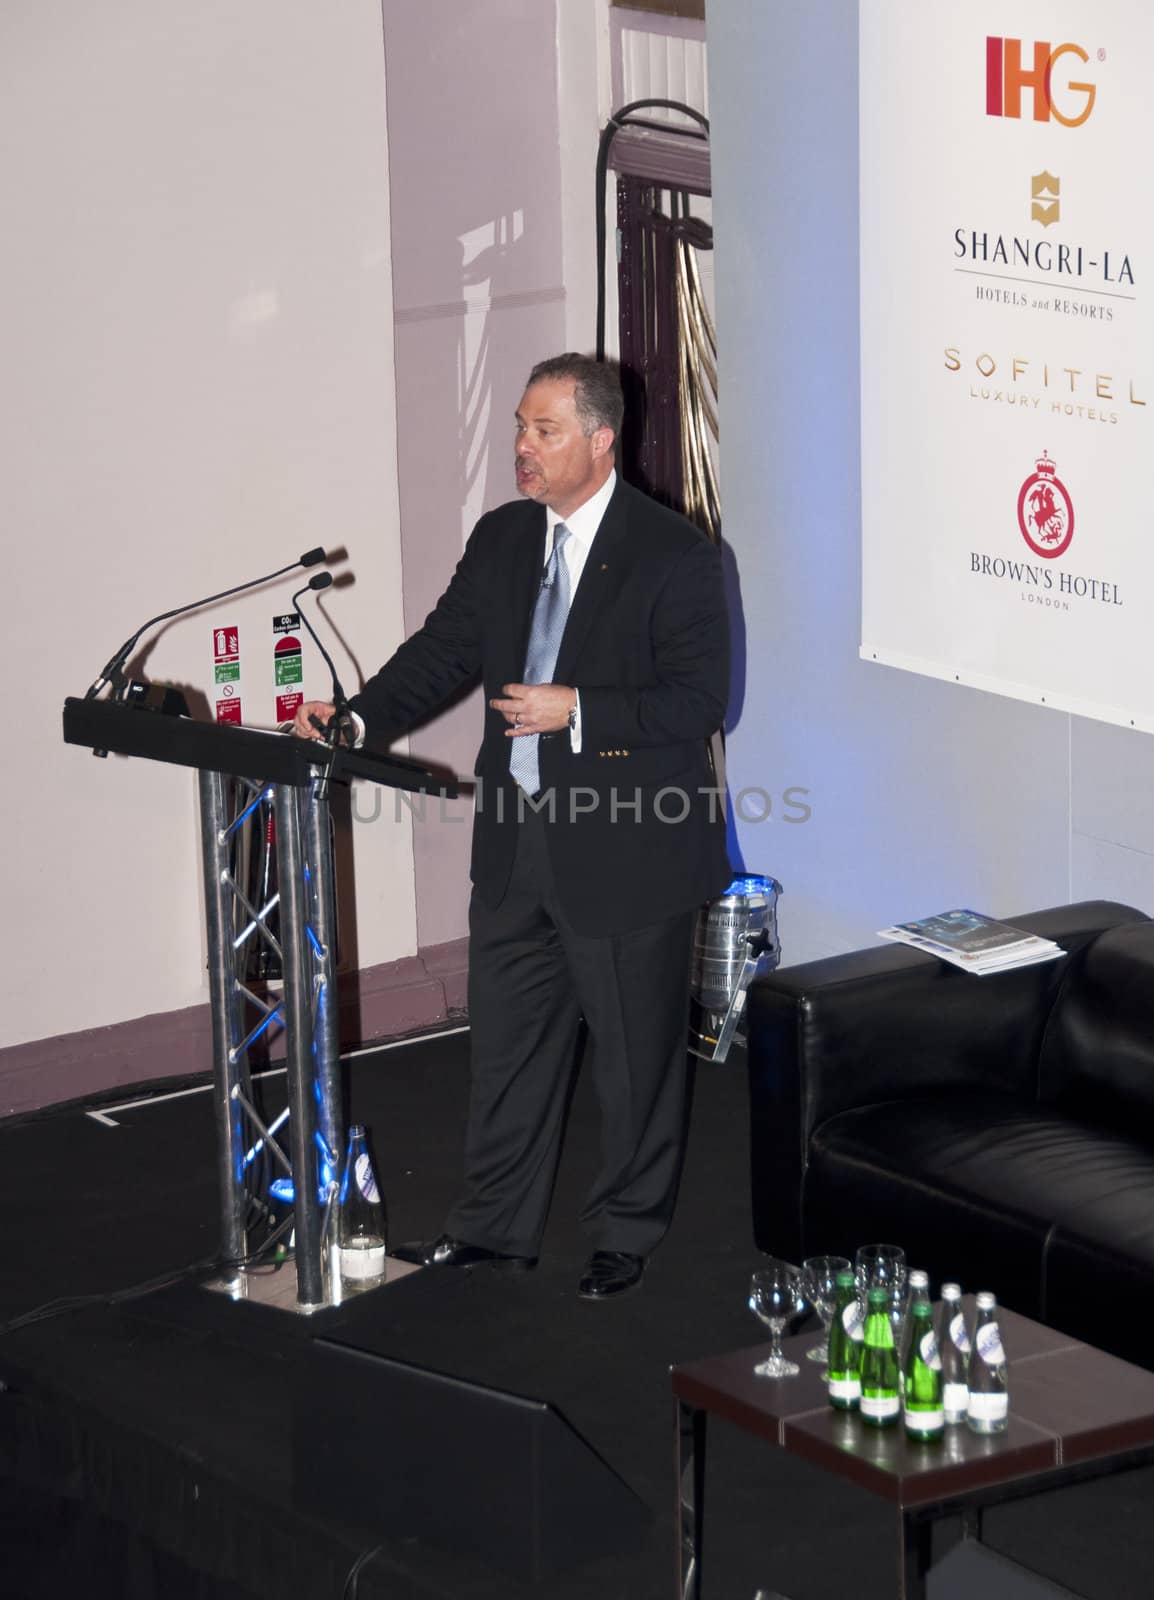 London - UK, January 30, 2012: Gerald Parent giving a speech at the 59th UICH les Clefs d'Or International Congress at the Sheraton Park Lane